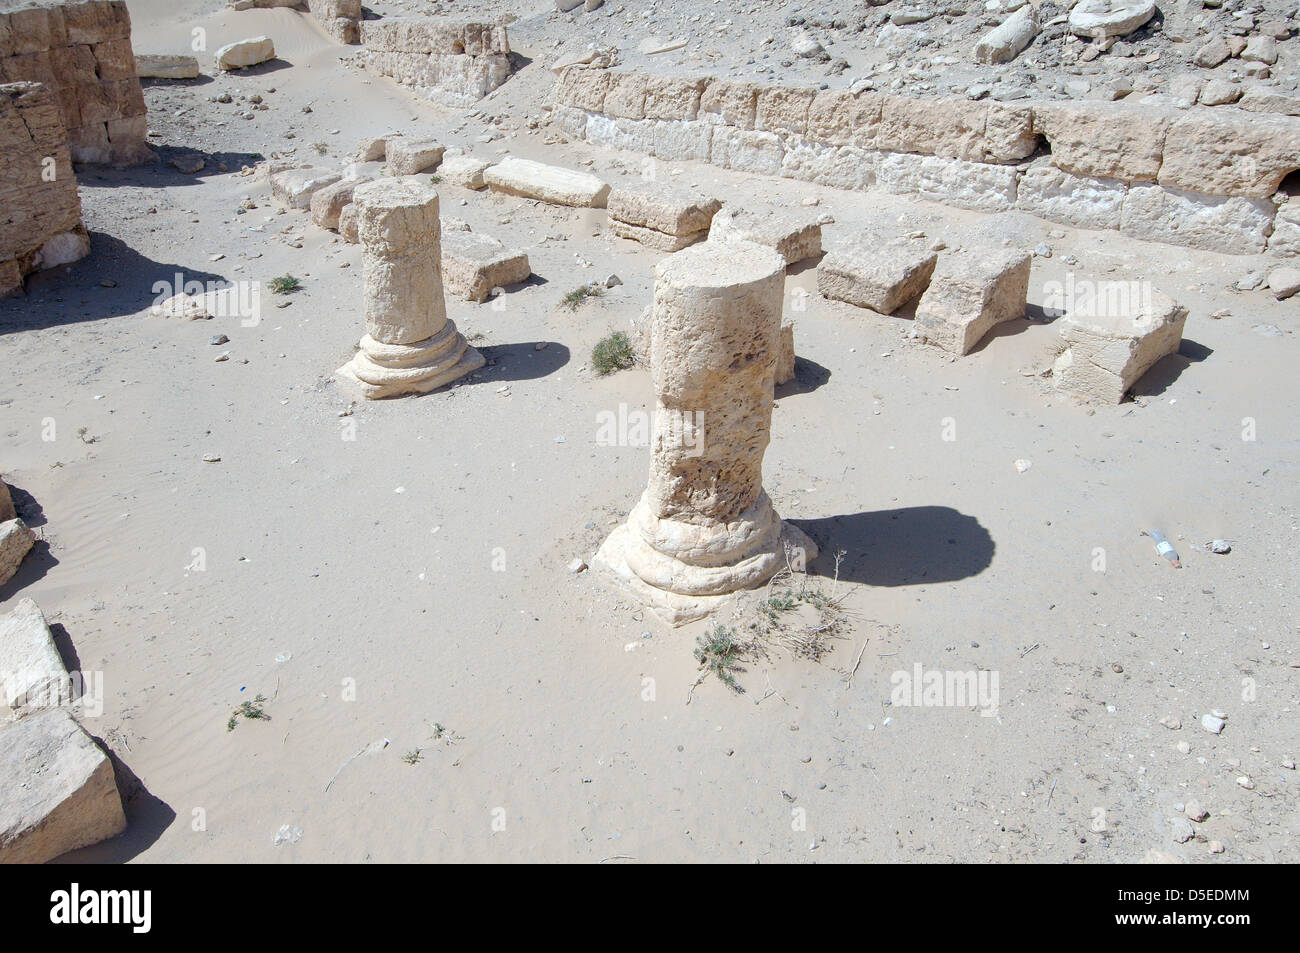 The ruins of the ancient city of Palmyra, Syria Stock Photo